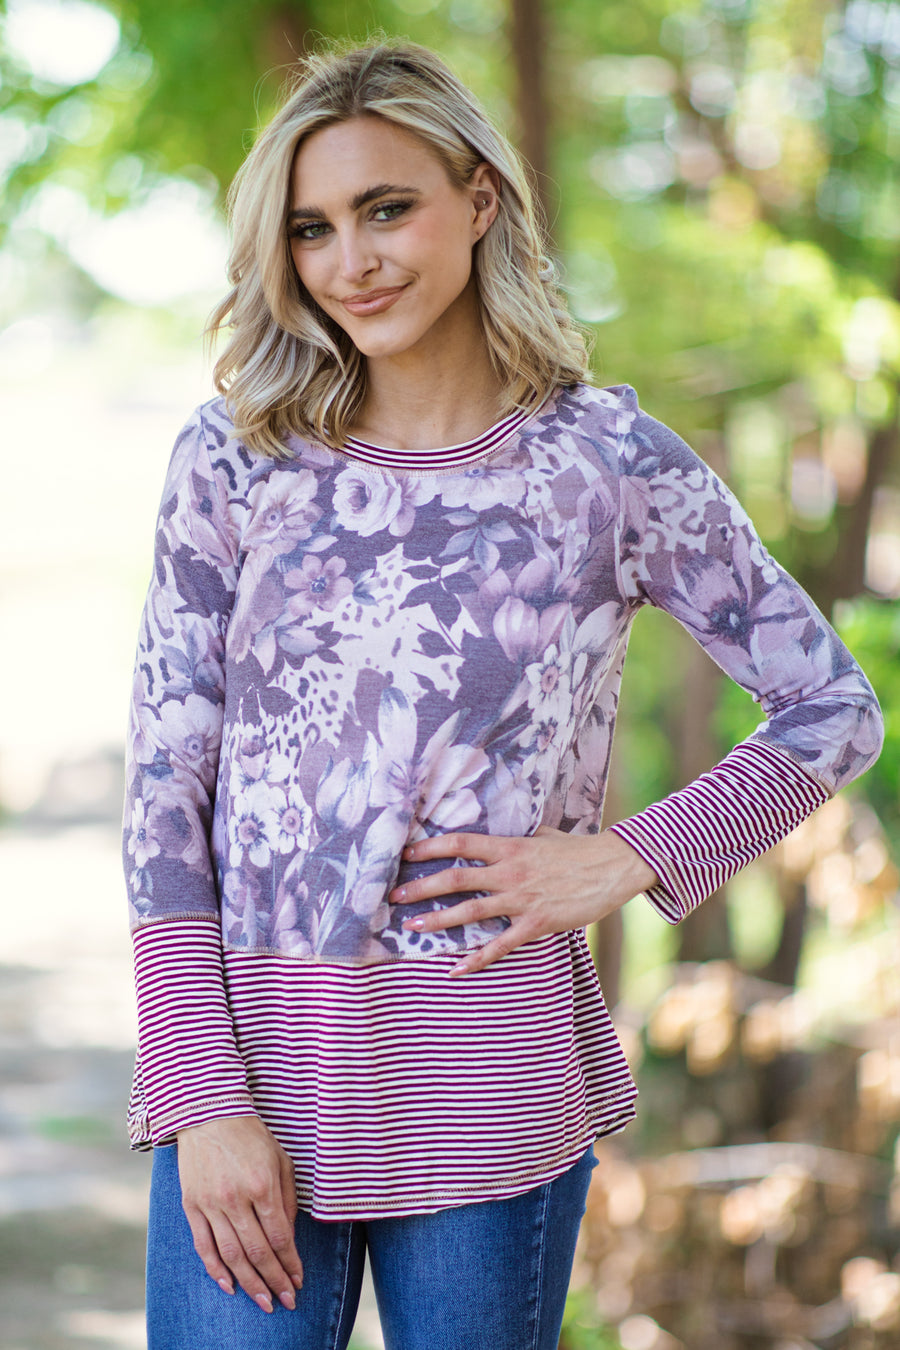 Burgundy Floral Print and Stripe Top - Filly Flair